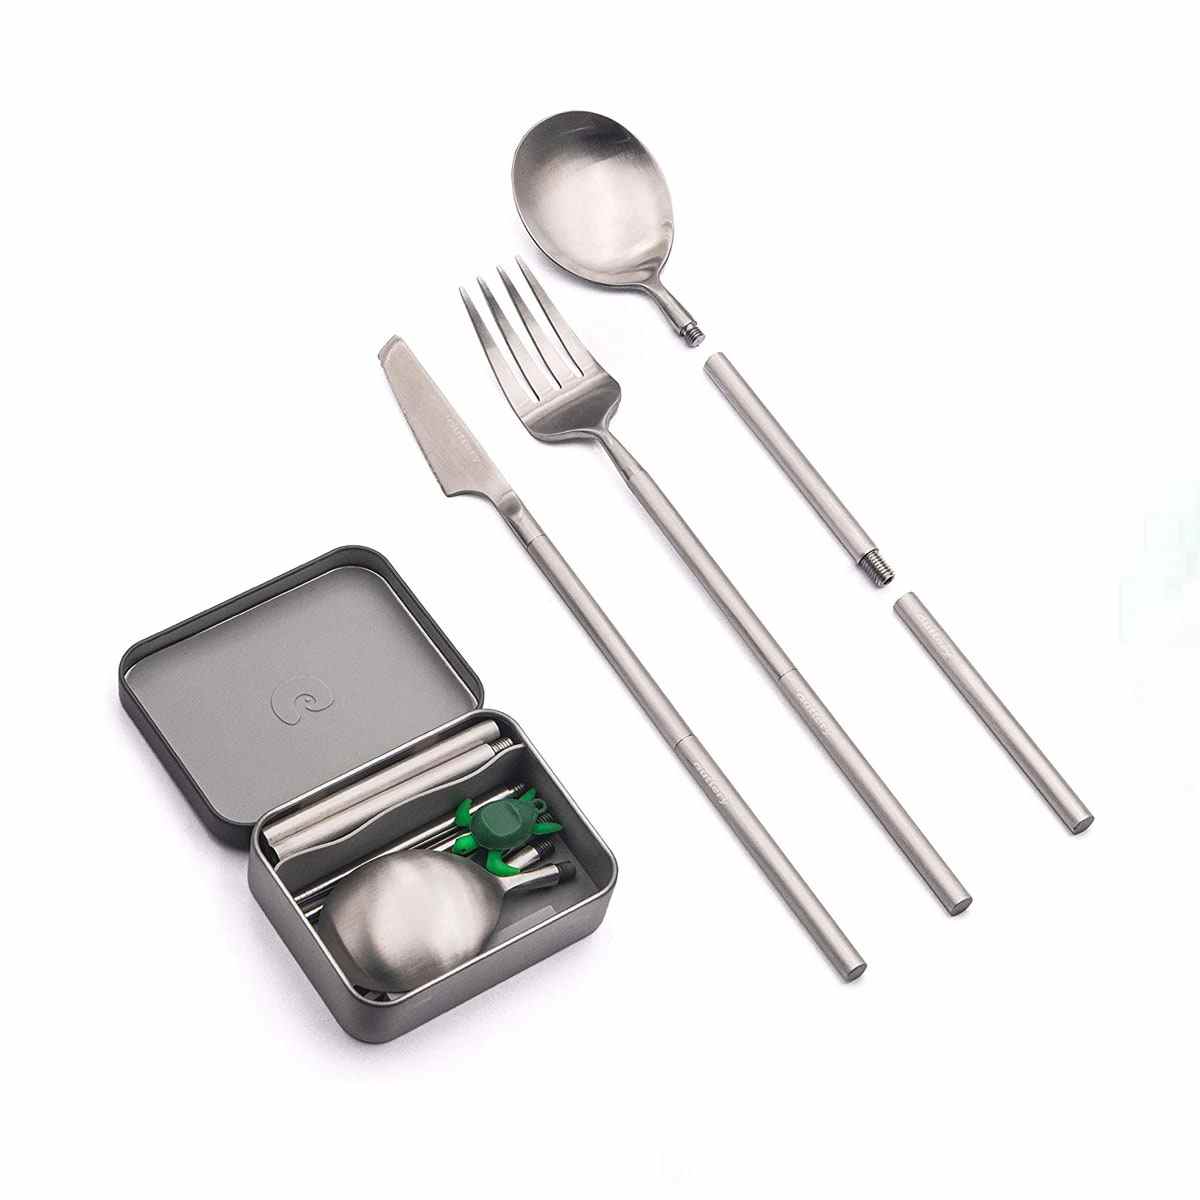 Outlery Stainless Steel Travel Cutlery Set with travel case on white background